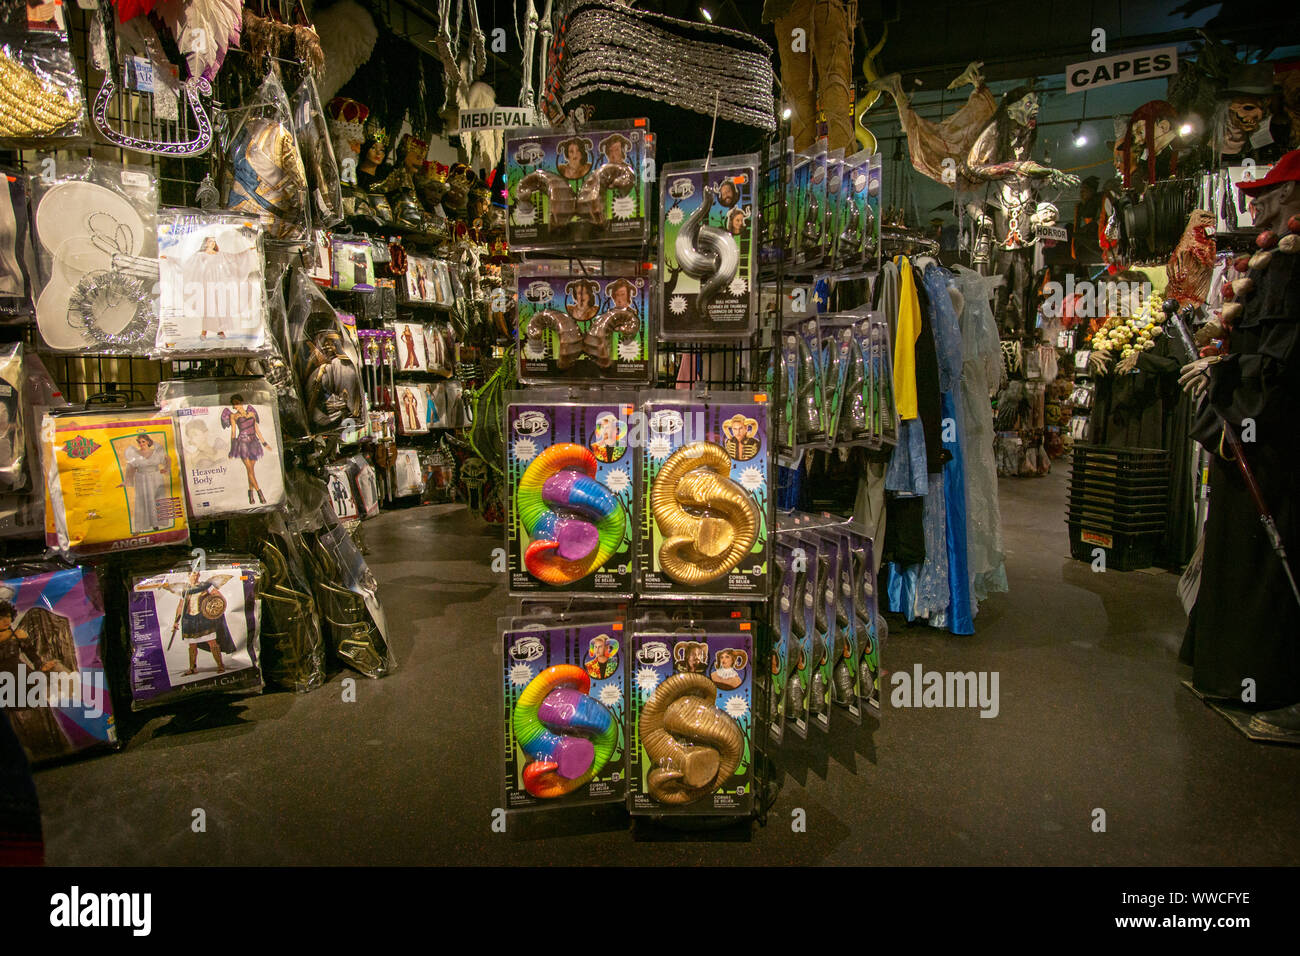 A view of the interior of The Halloween Adventure costume shop in Greenwich Village, Manhattan, New York City. Stock Photo